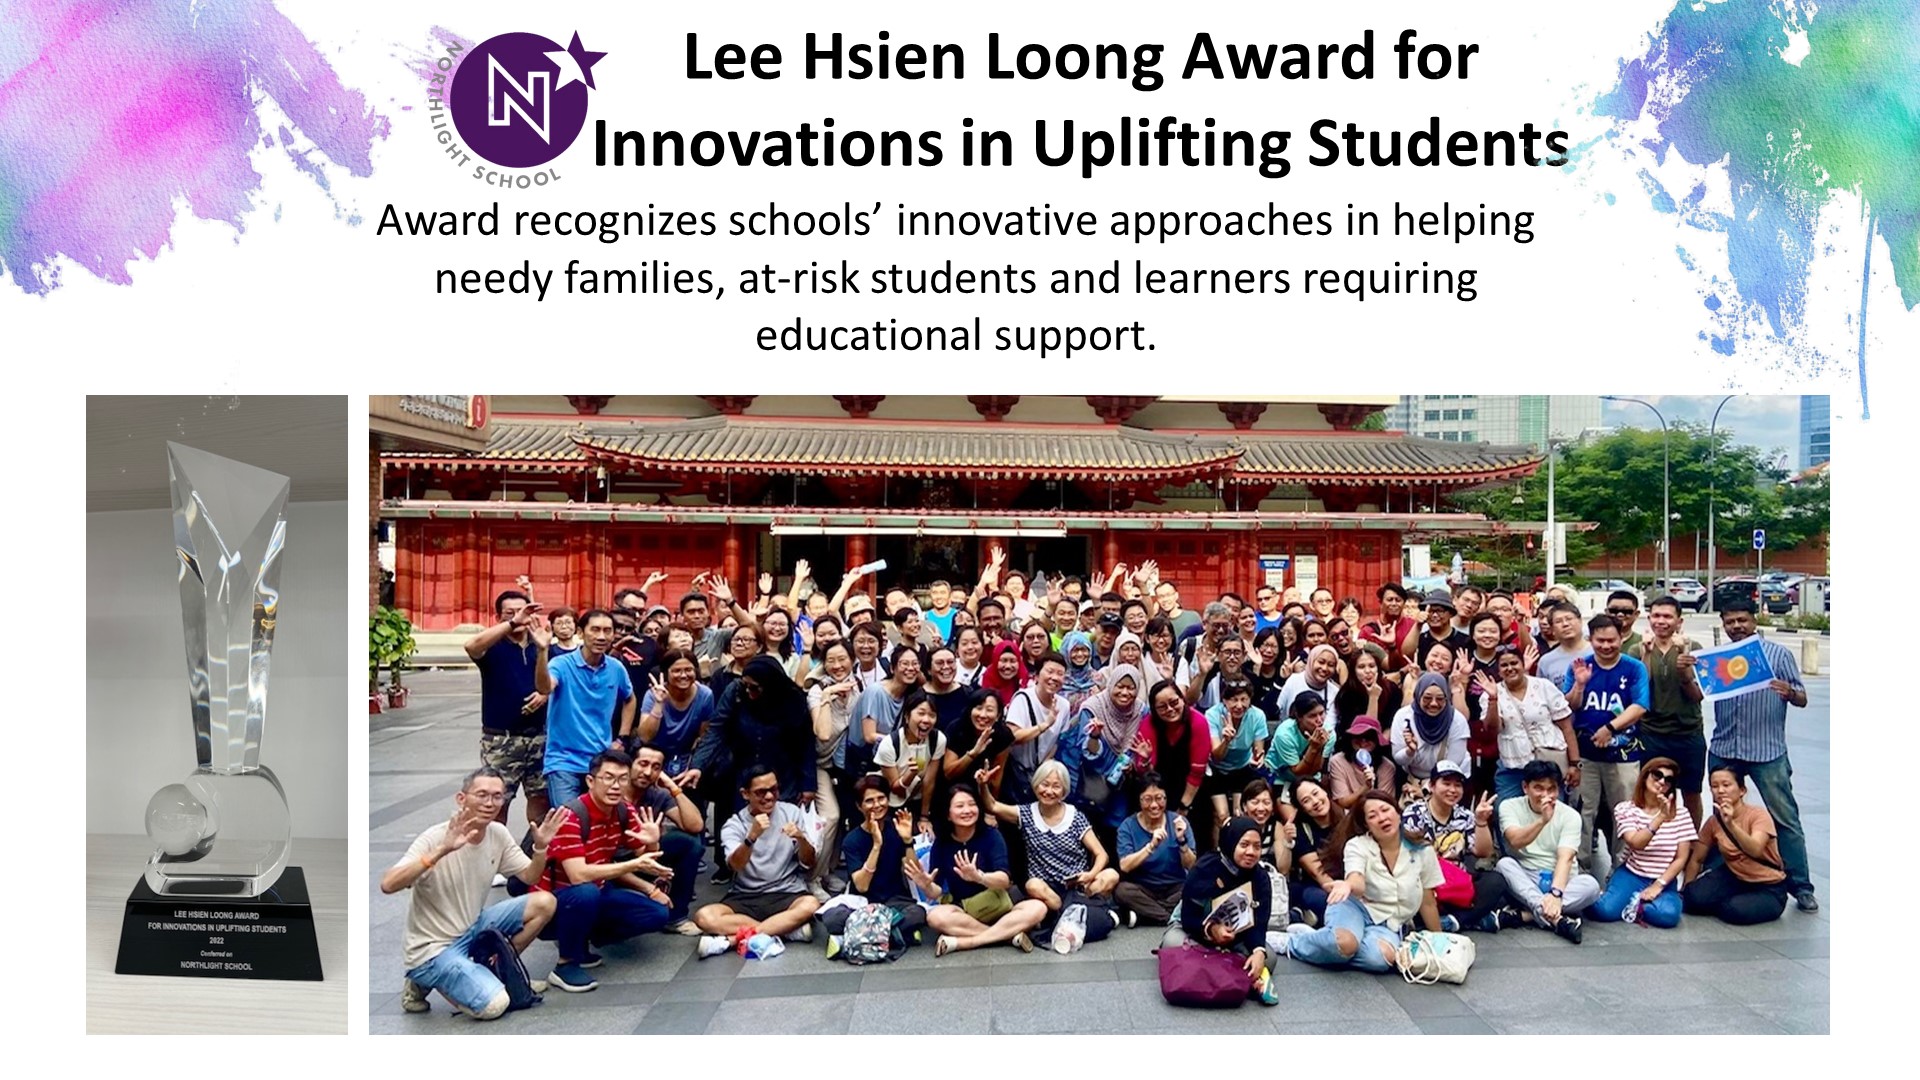 Lee Hsien Loong Award for Innovations in Uplifting Students